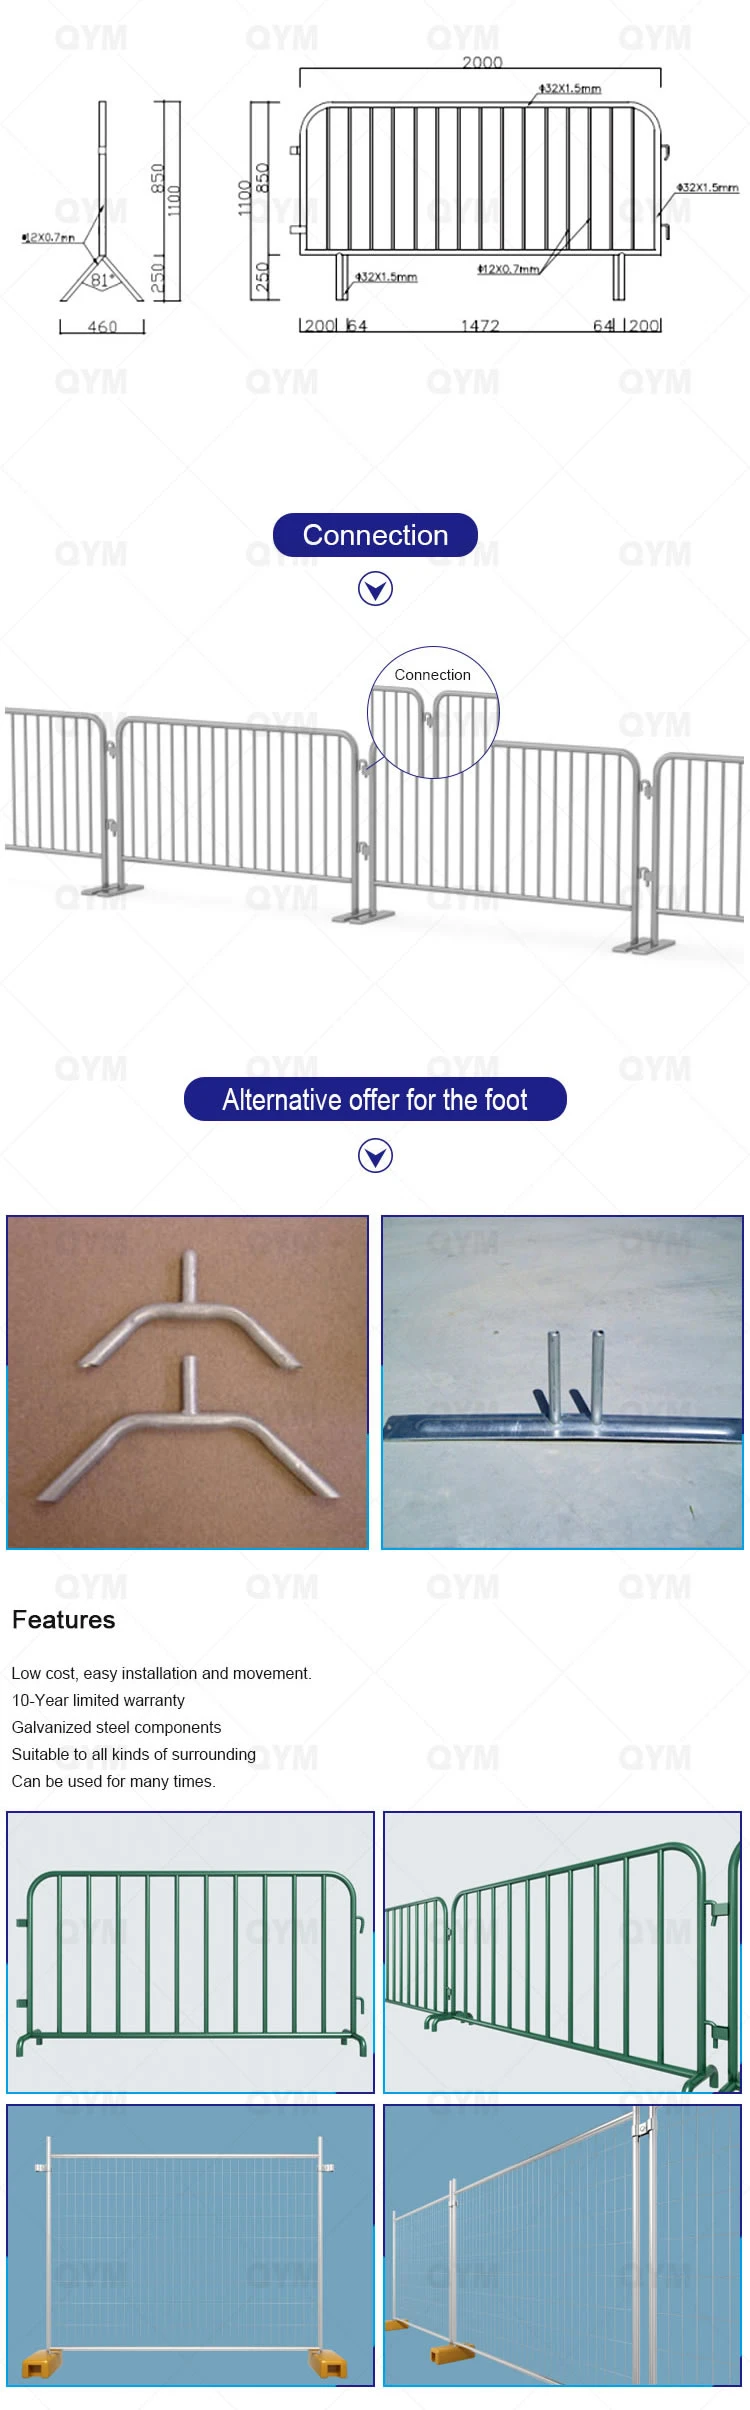 Canada Temporary Mobile Fence Security Welded Fence Panel